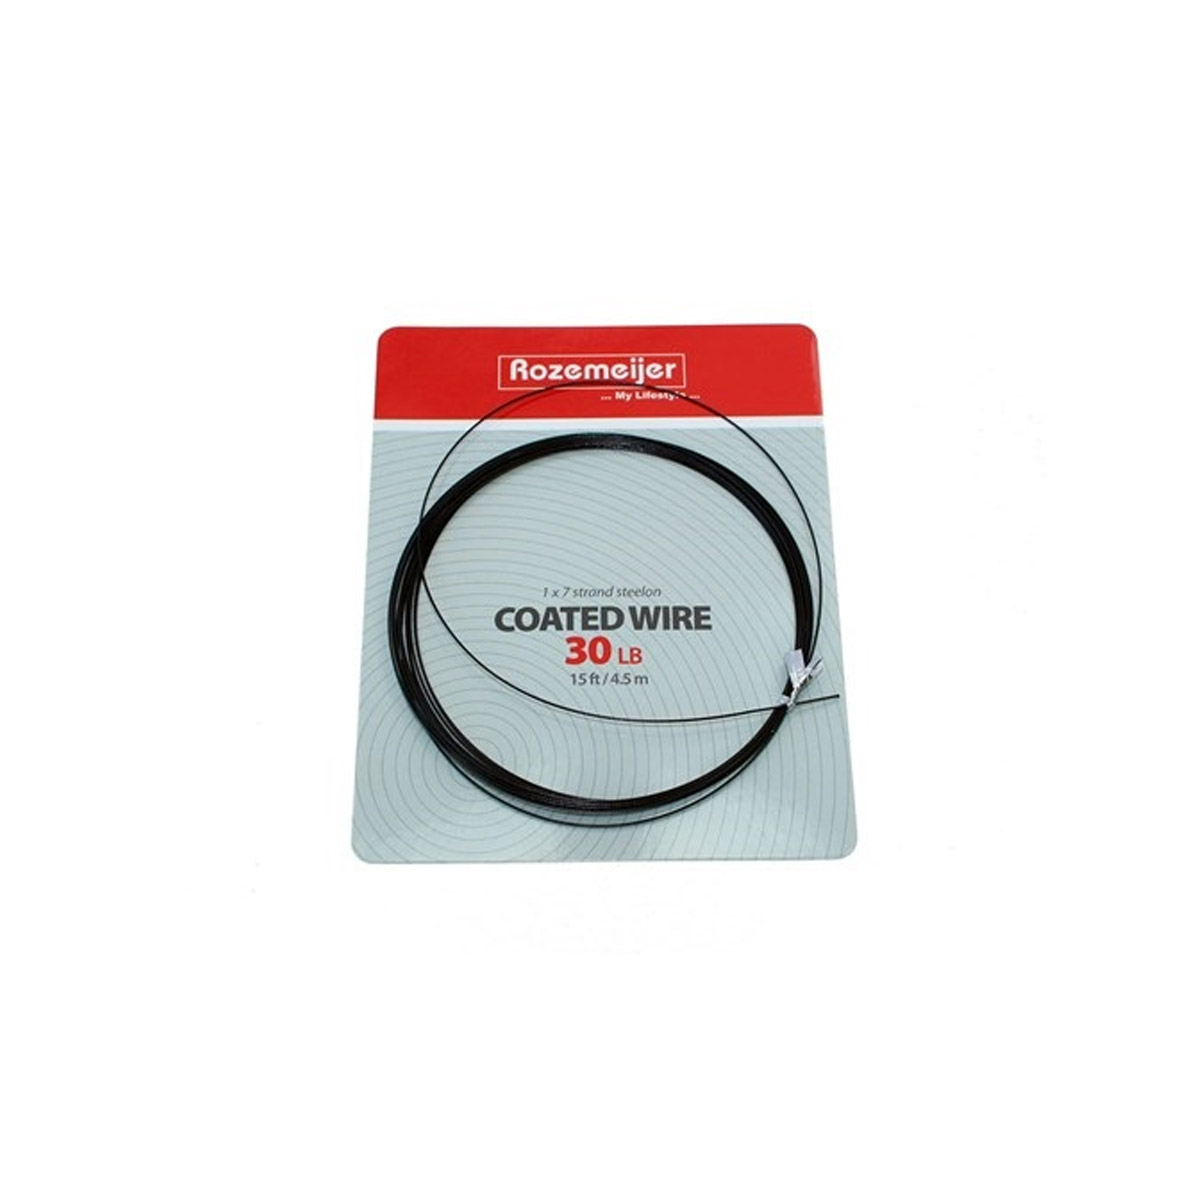 Rozemeijer Coated Wire 1x7 Leader 30 LBS 